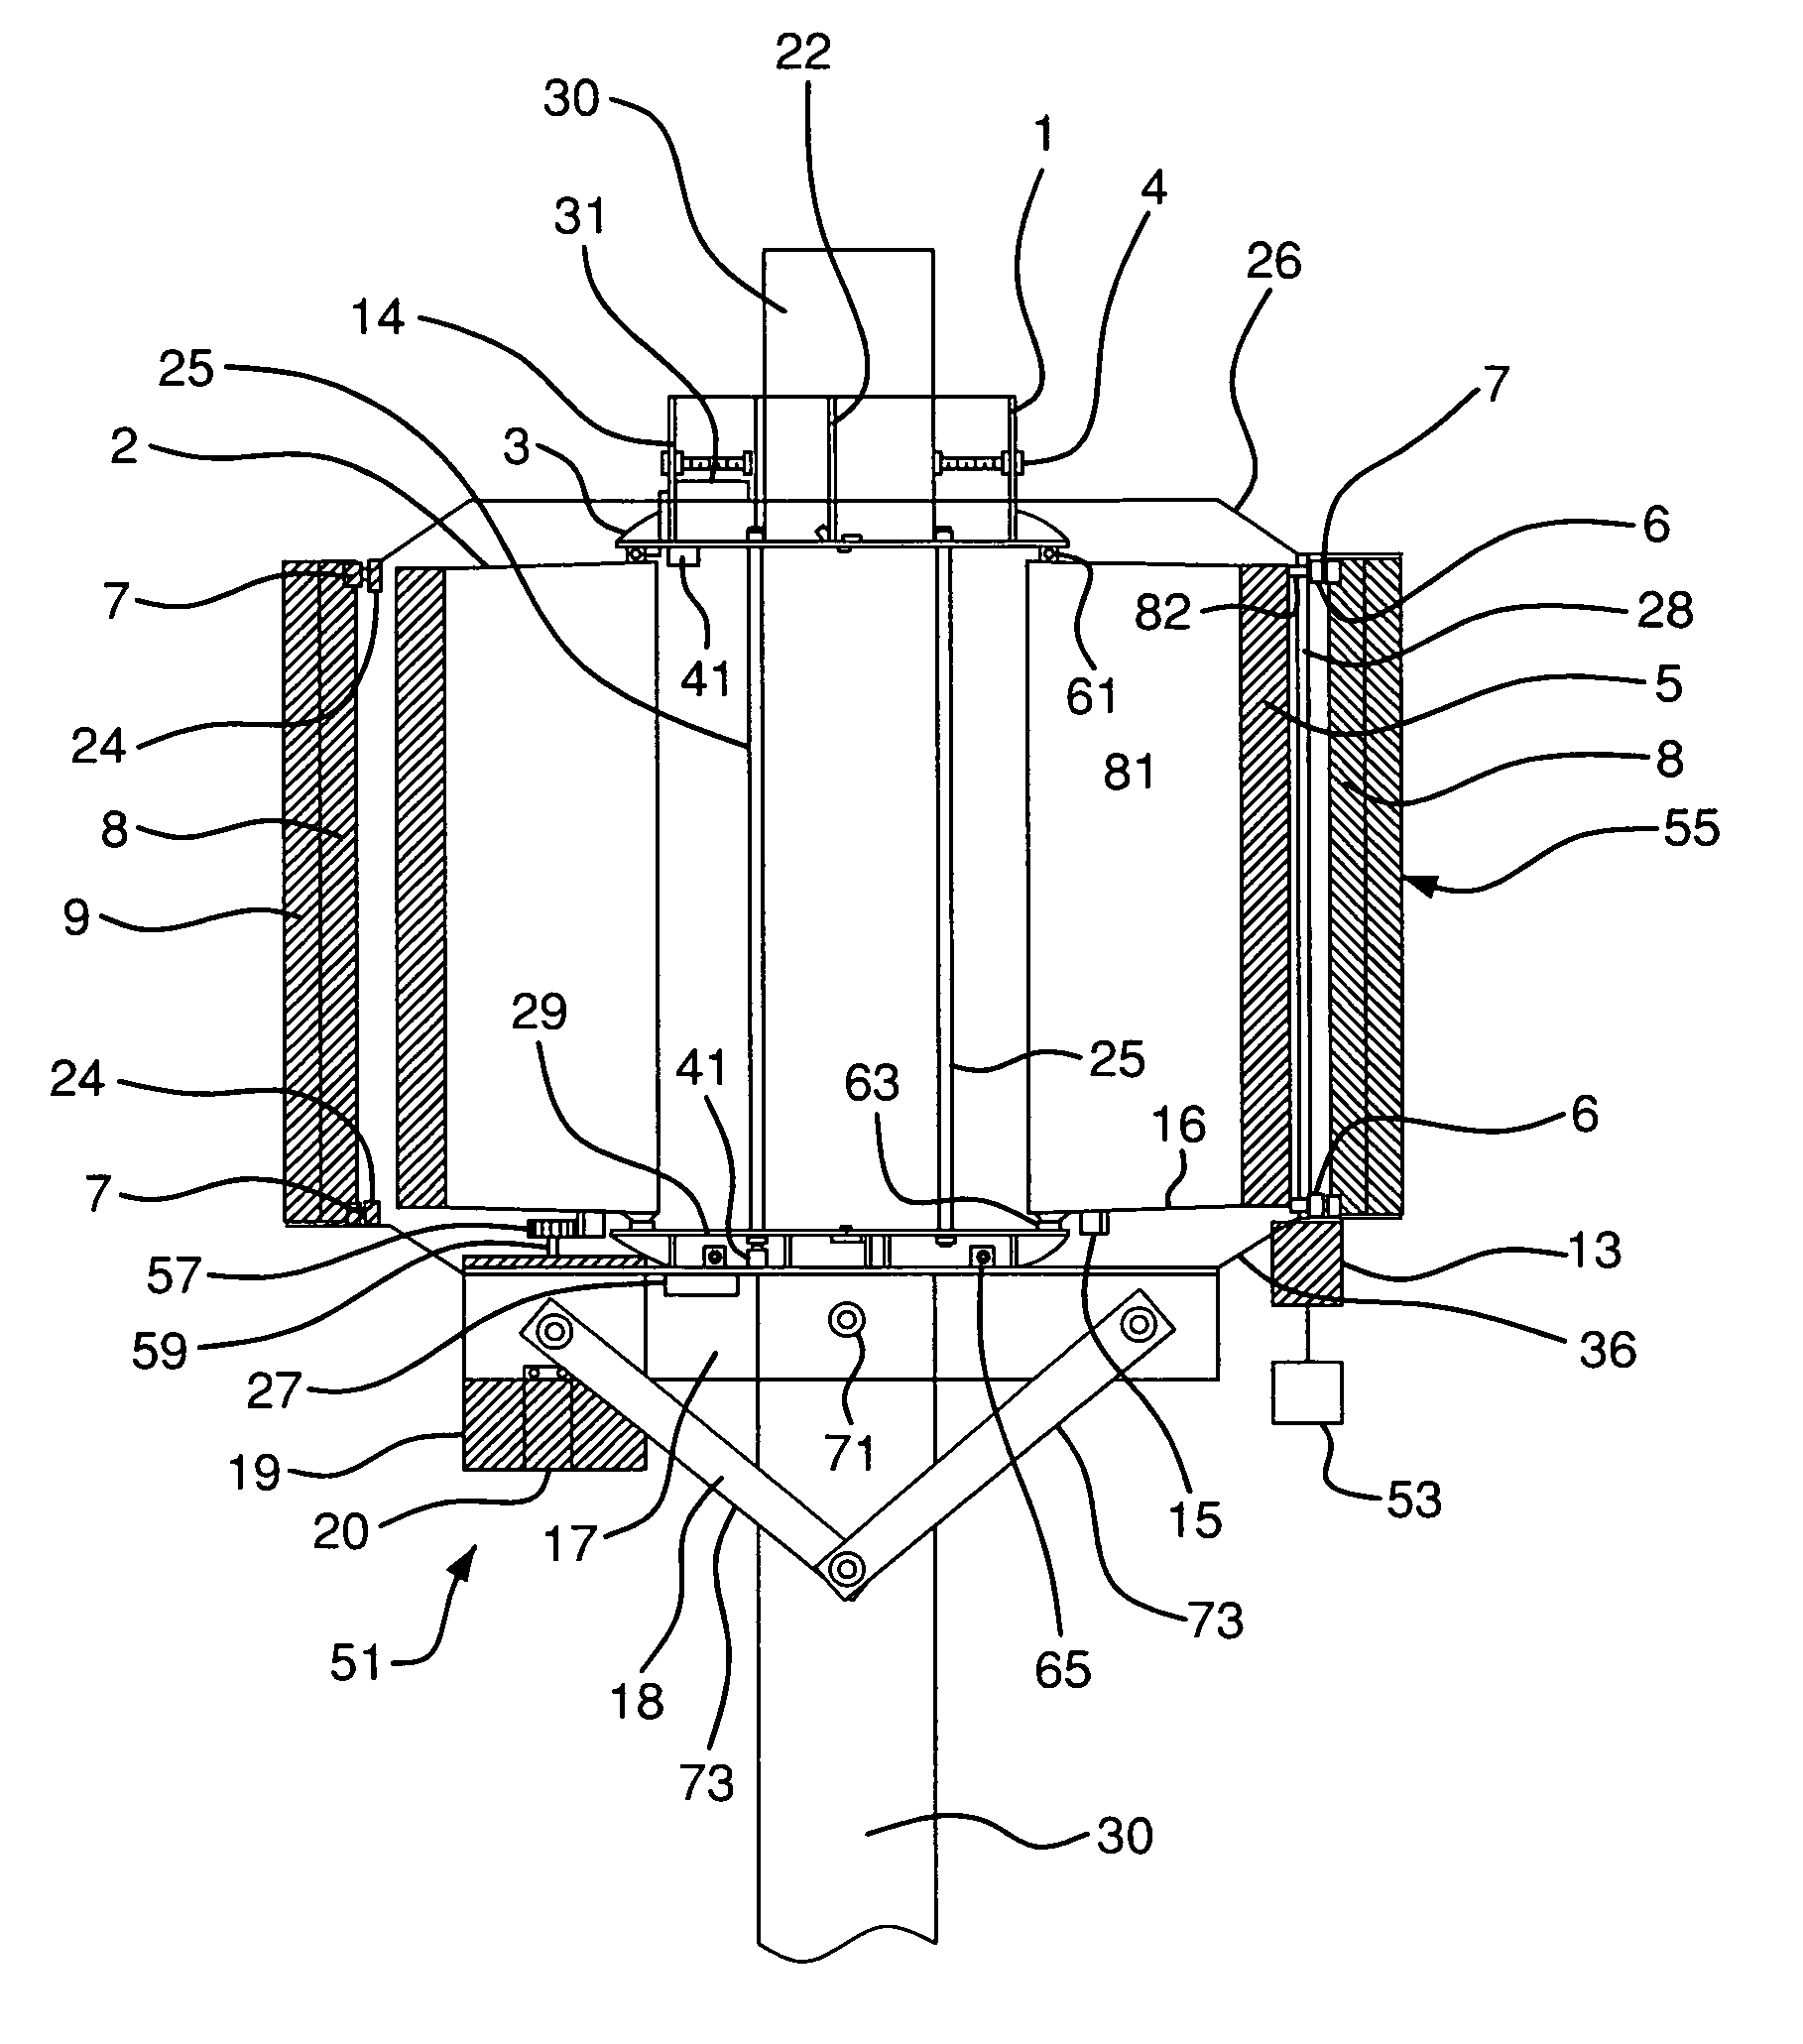 Electricity generating assembly